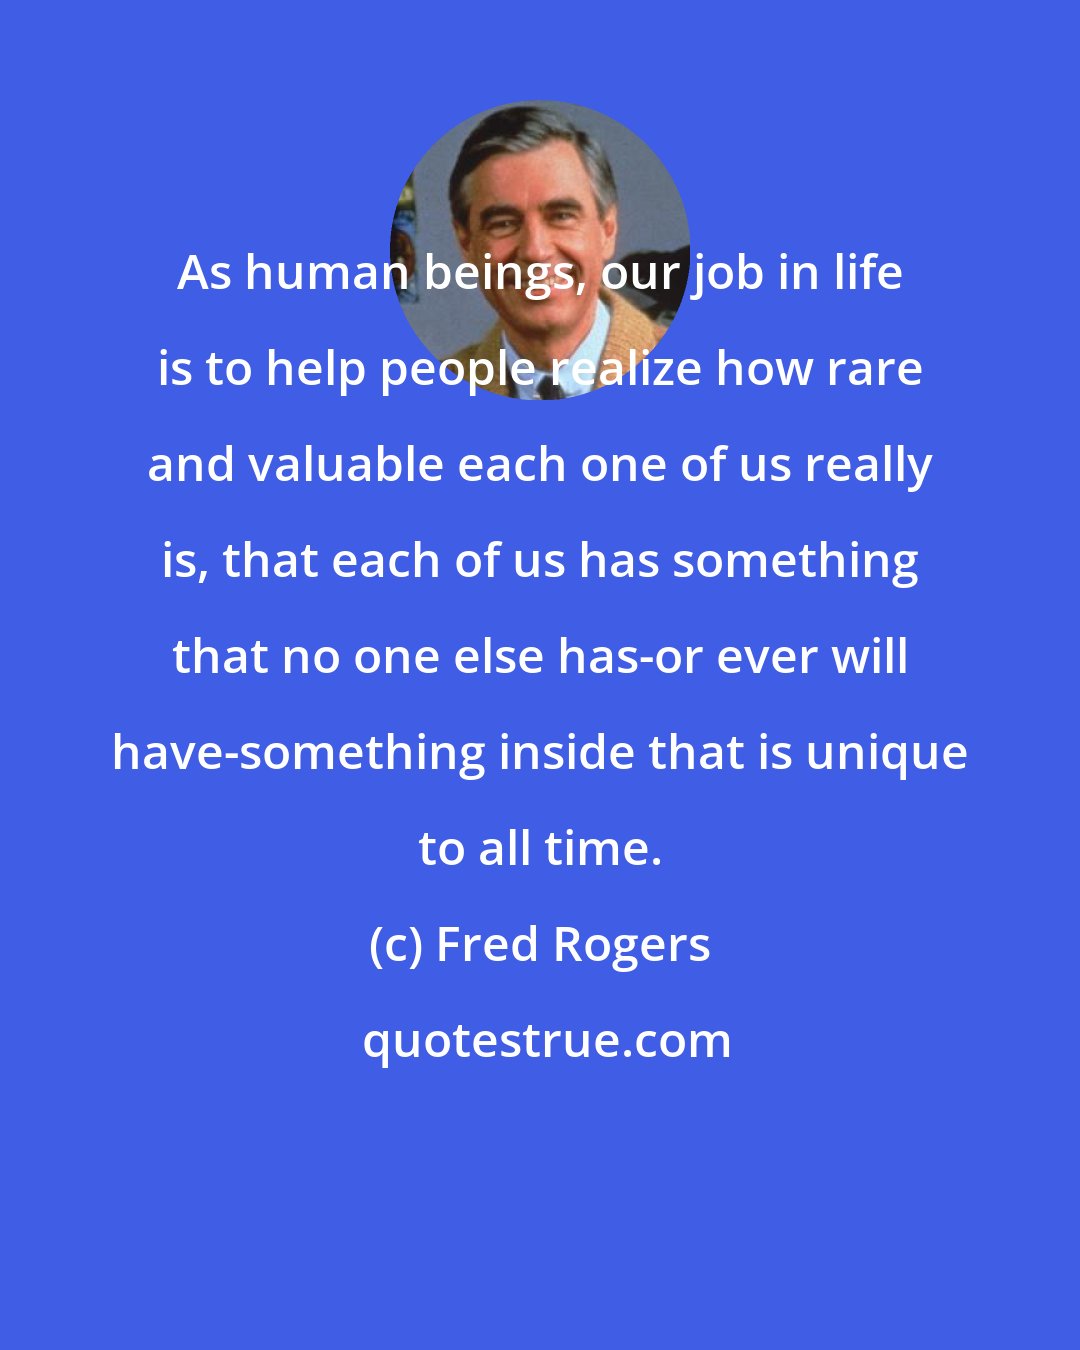 Fred Rogers: As human beings, our job in life is to help people realize how rare and valuable each one of us really is, that each of us has something that no one else has-or ever will have-something inside that is unique to all time.